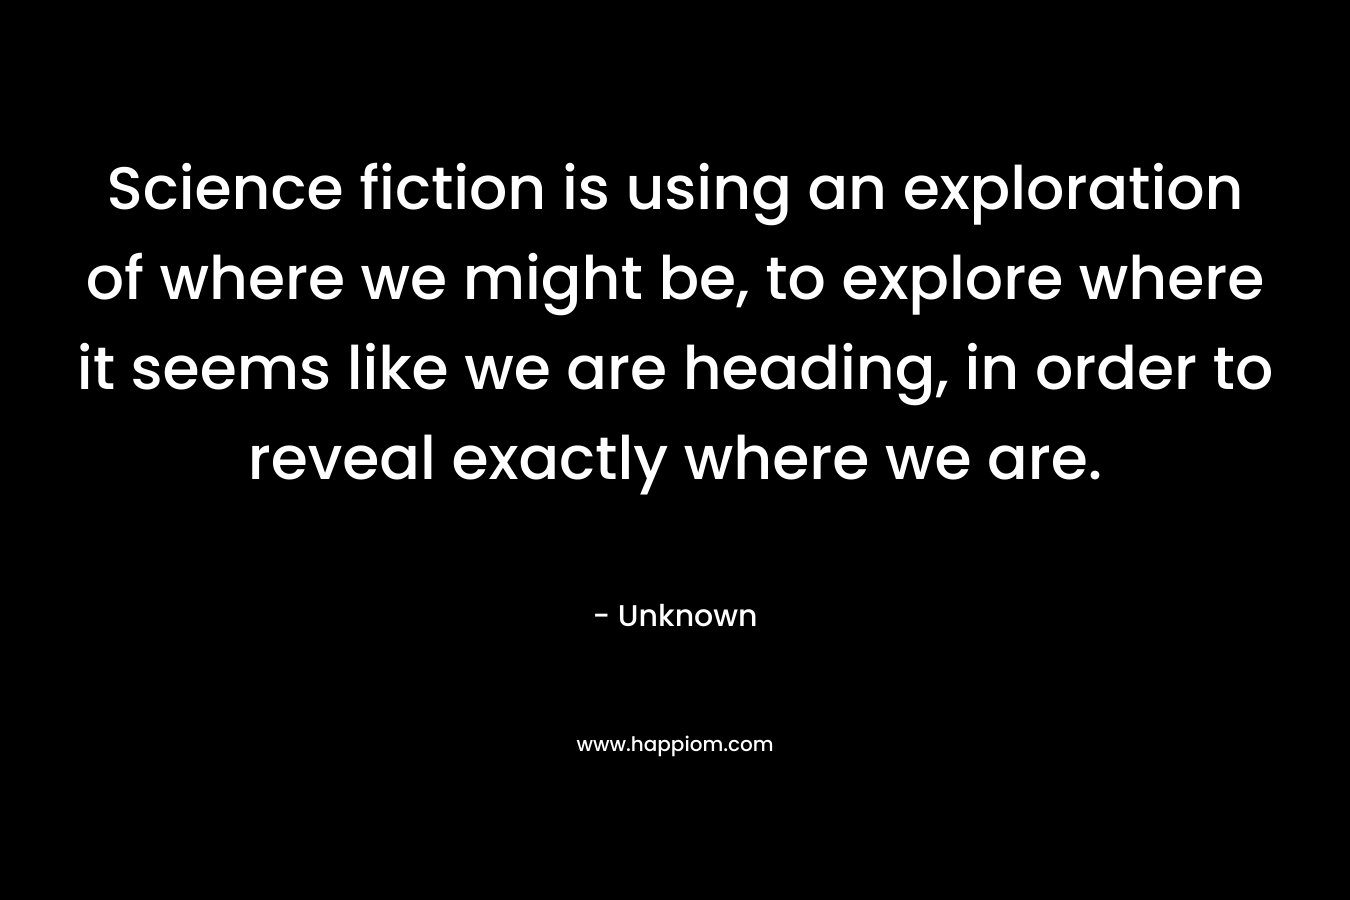 Science fiction is using an exploration of where we might be, to explore where it seems like we are heading, in order to reveal exactly where we are. – Unknown